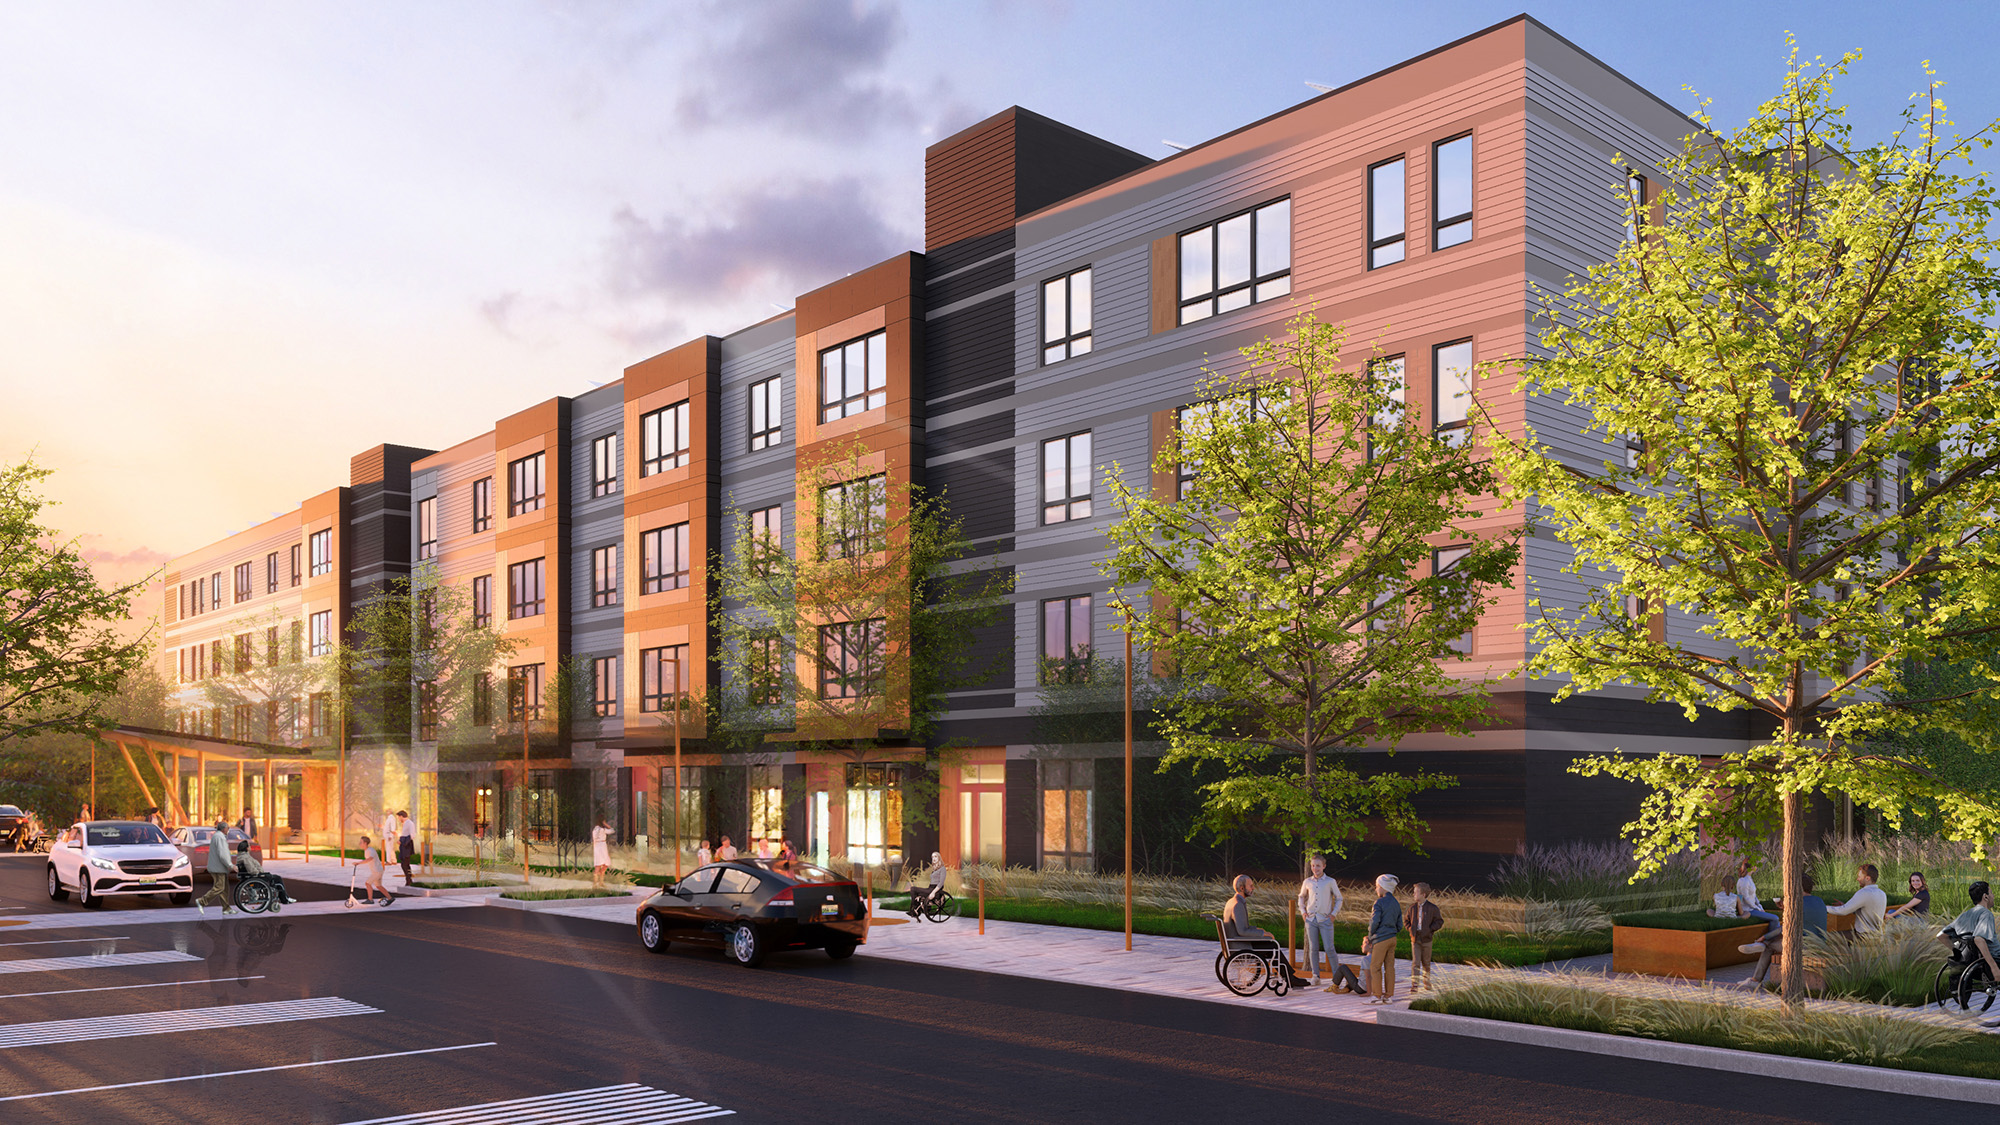 Rendering of mixed-use affordable housing community The Downs in Maine